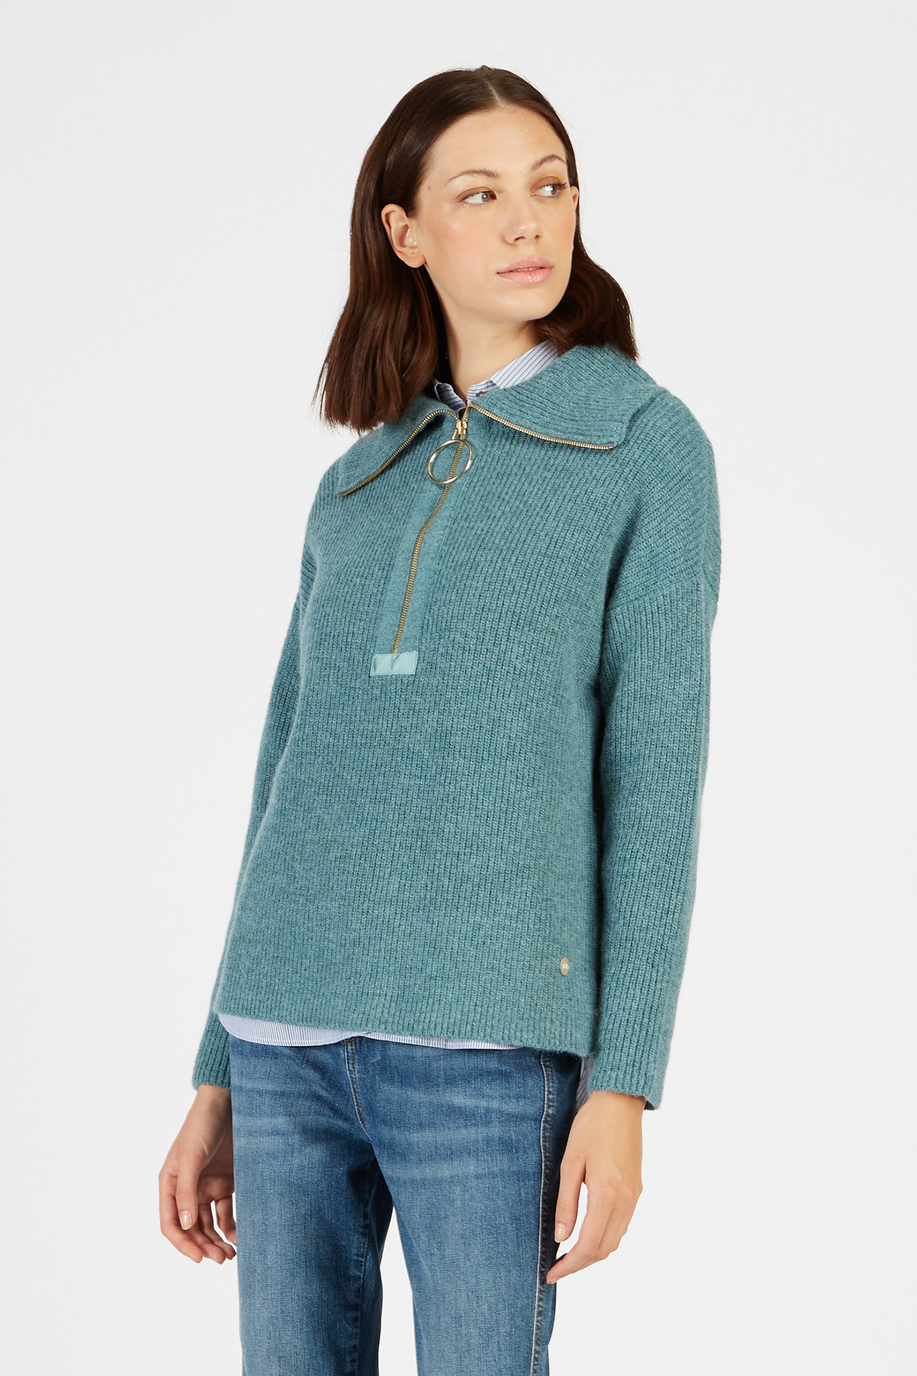 Women’s knitted sweater in alpaca regular fit with zip - Winter looks for her | La Martina - Official Online Shop